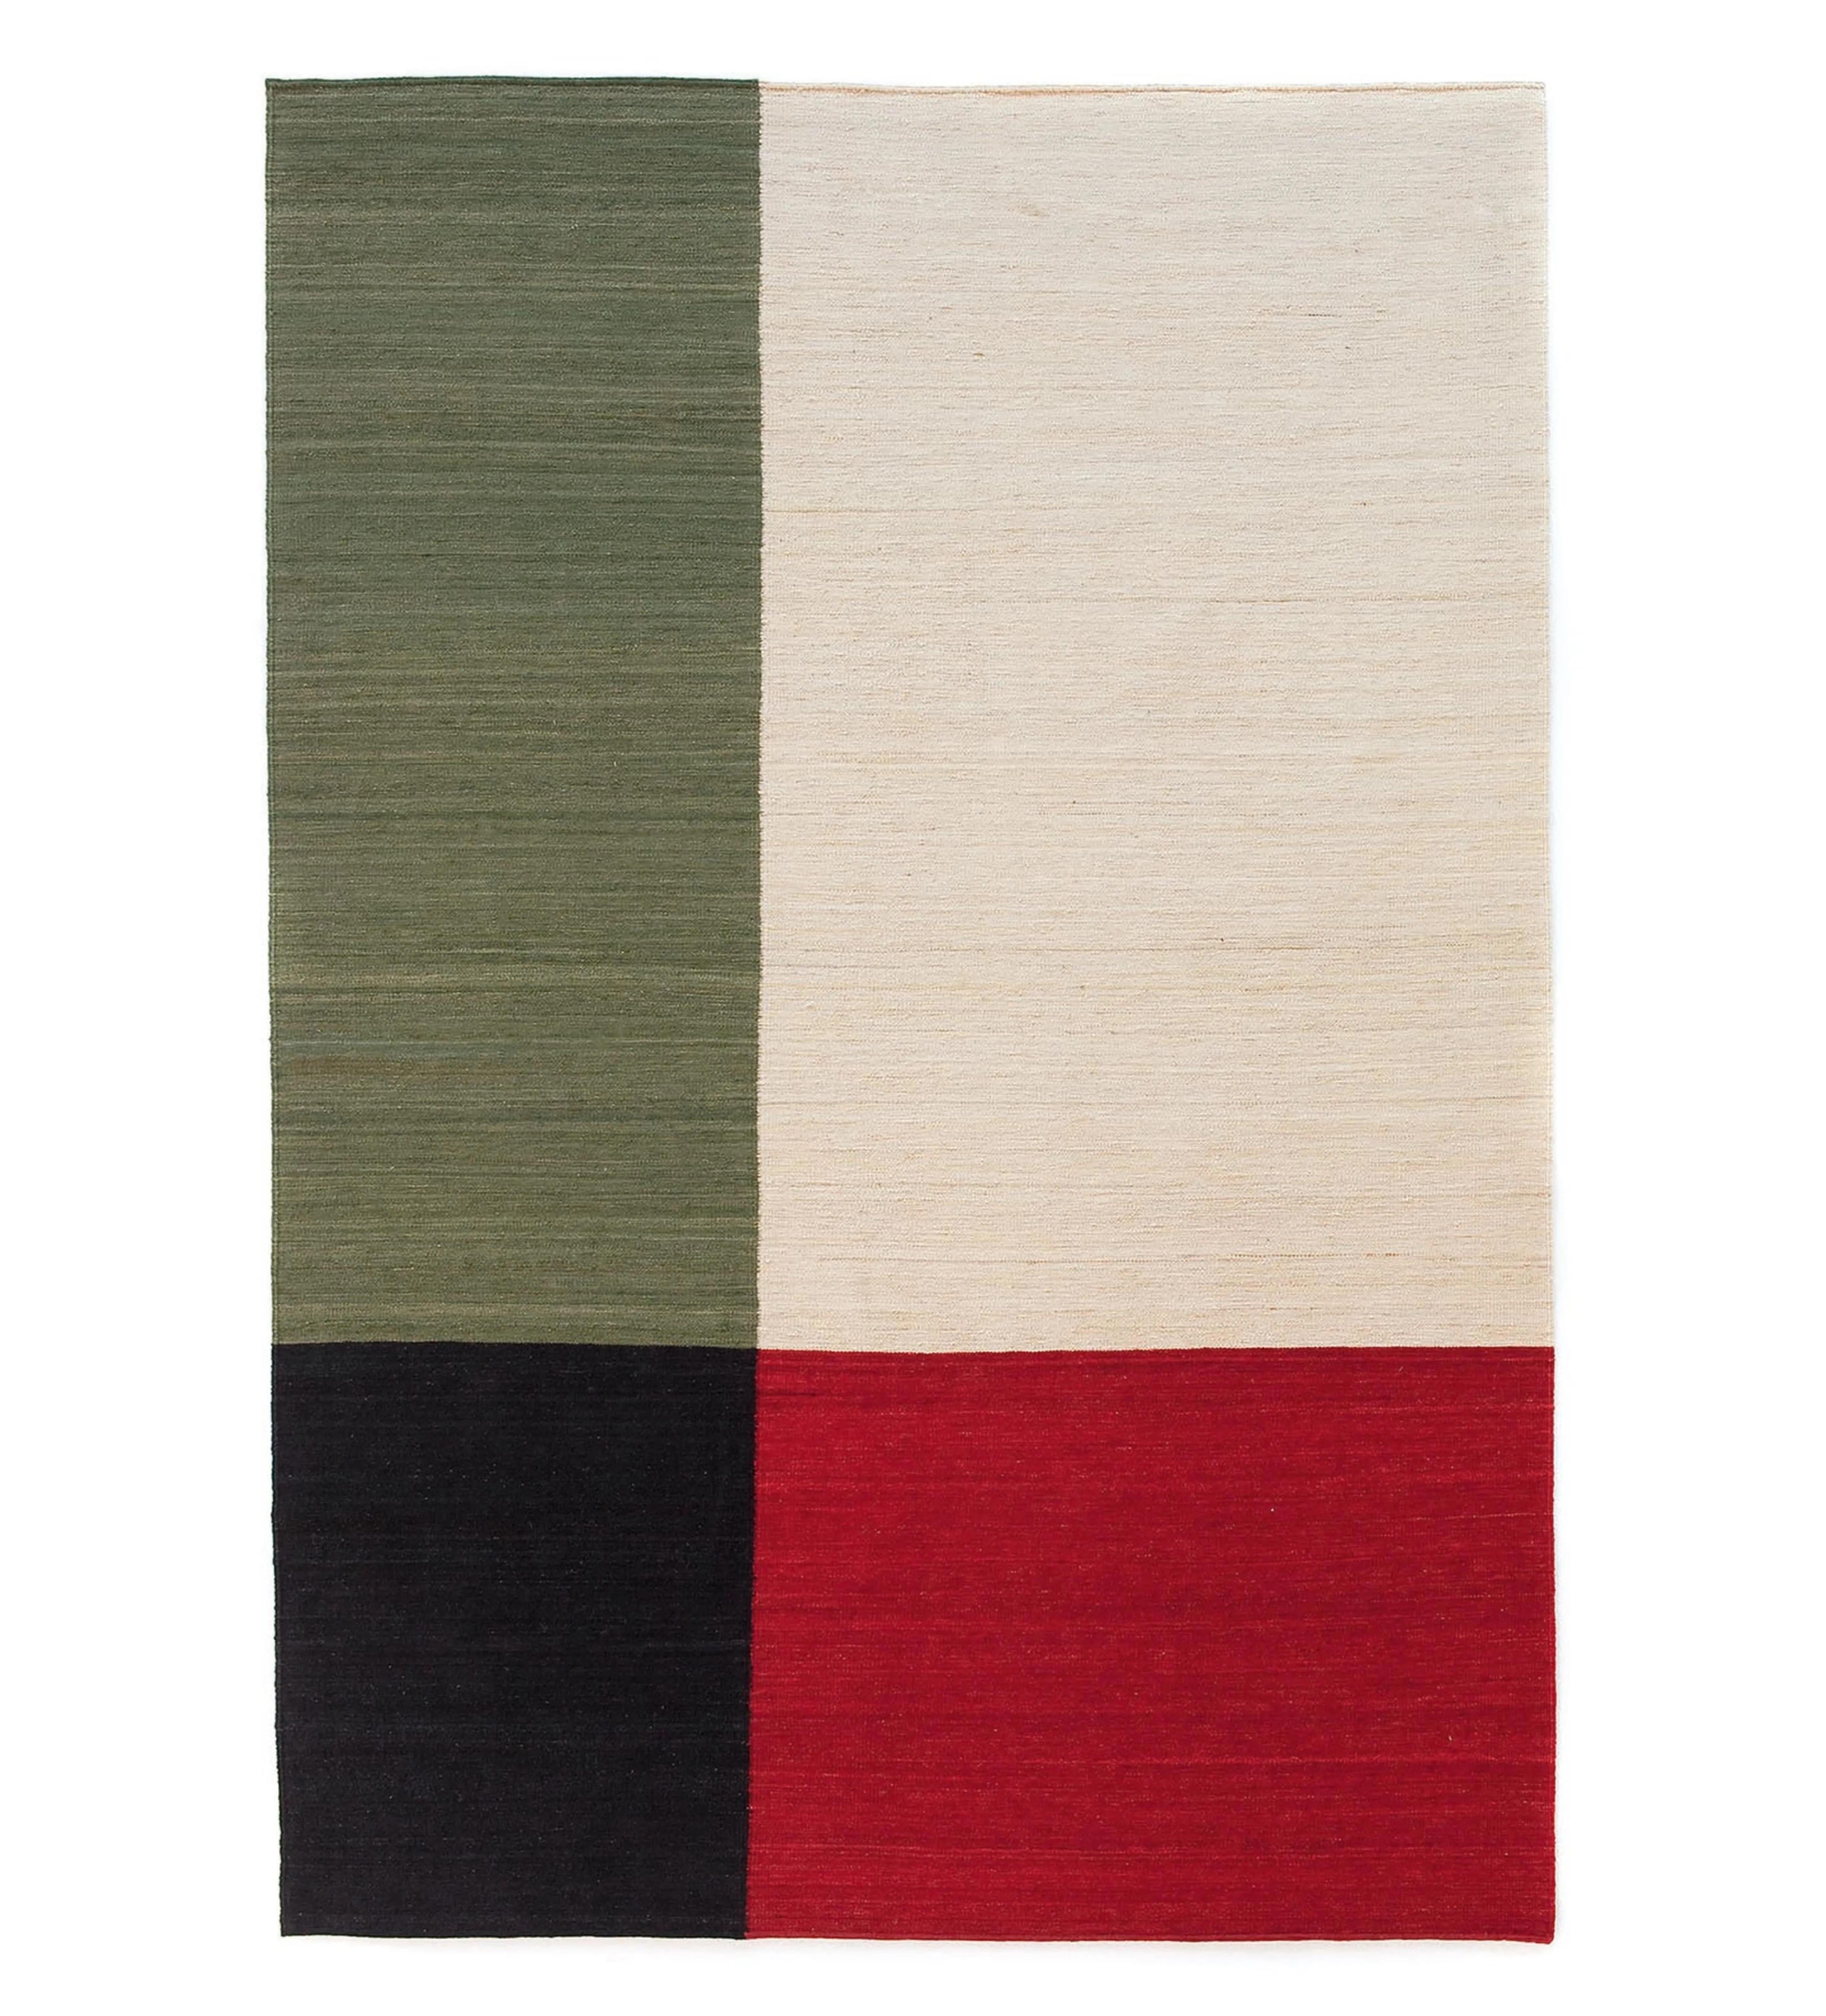 Wool Large 'Mélange Color 1' Hand-Loomed Rug by Sybilla for Nanimarquina For Sale